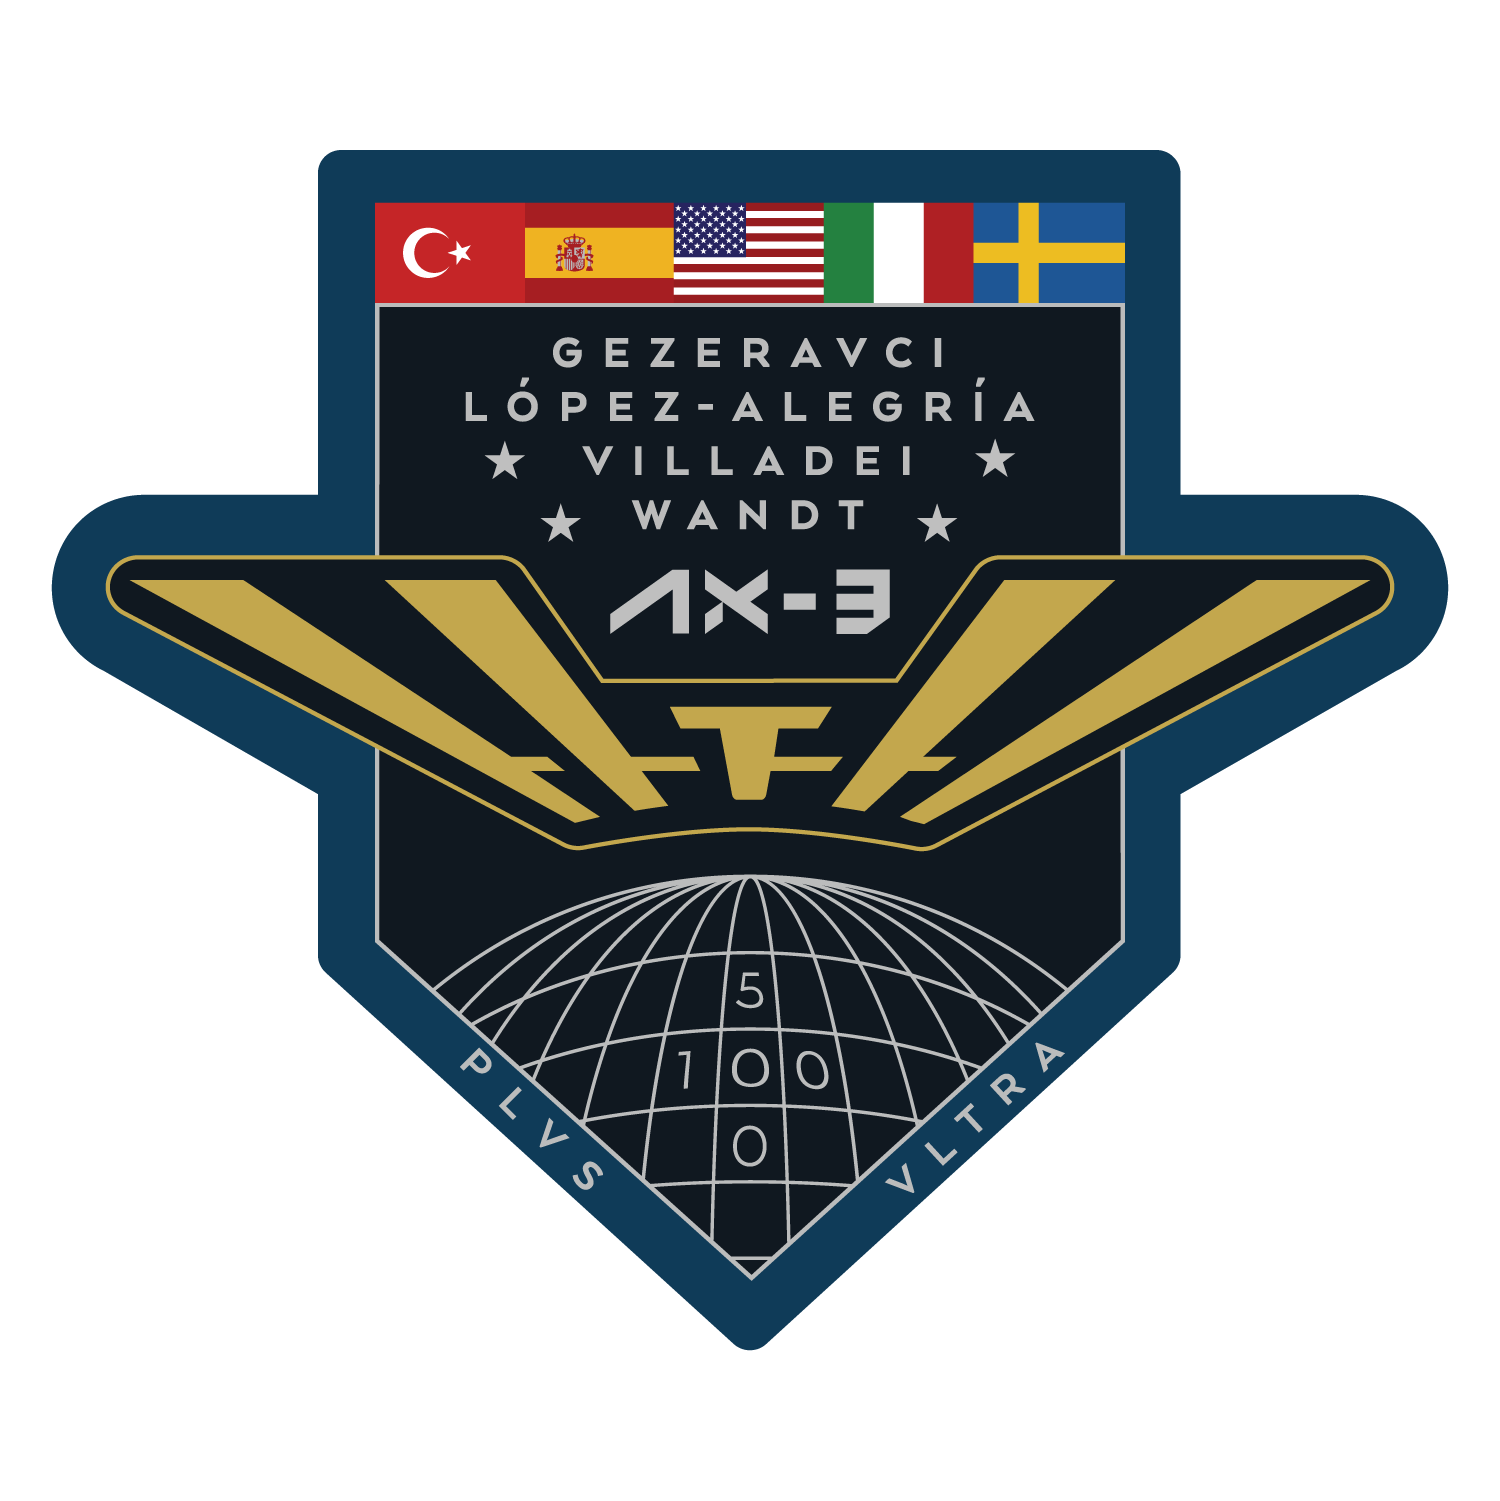 The Axiom-3 mission patch. ©Axiom Space